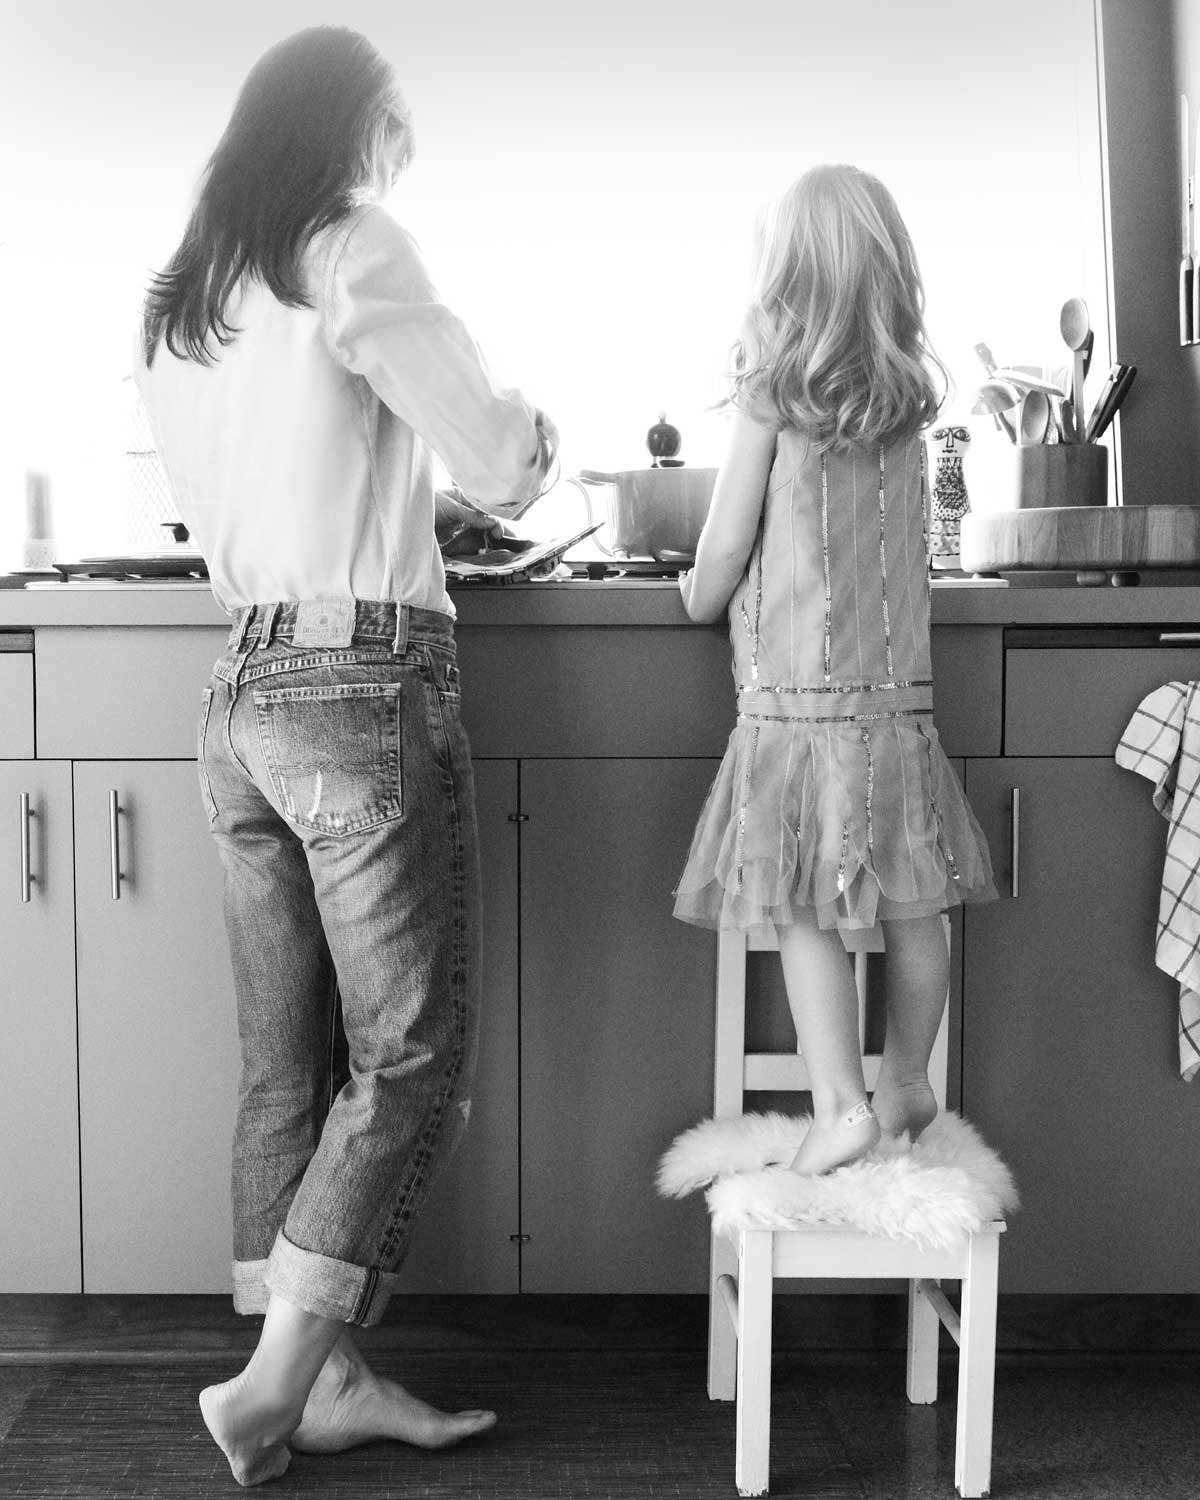 A Lesson on Parenting From the Kitchen Counter